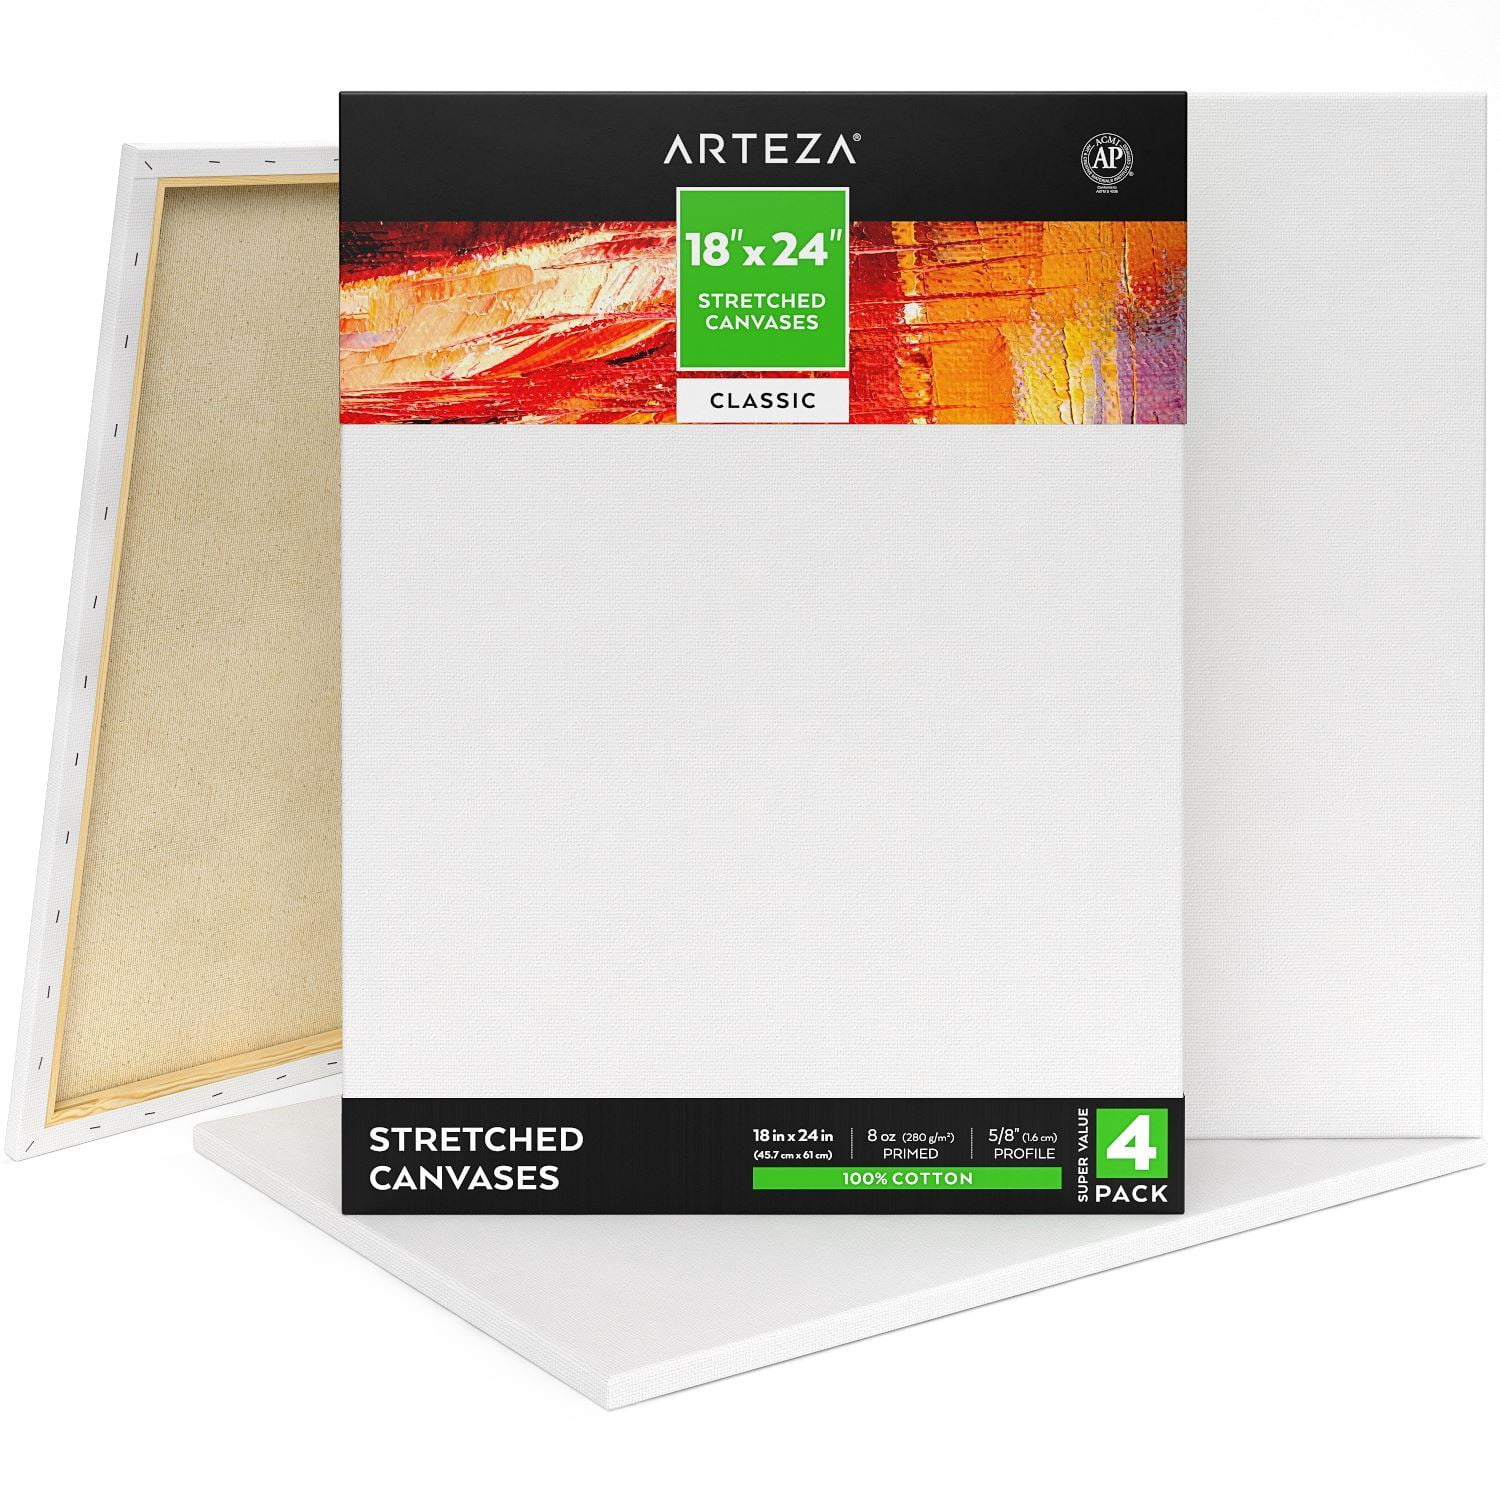 Tempera & Wet Art Media Acid-Free Primed Art Boards for Acrylic & Oil Paint Arteza 11x14 inch Black Canvas Panels for Painting 100% Cotton Pack of 14